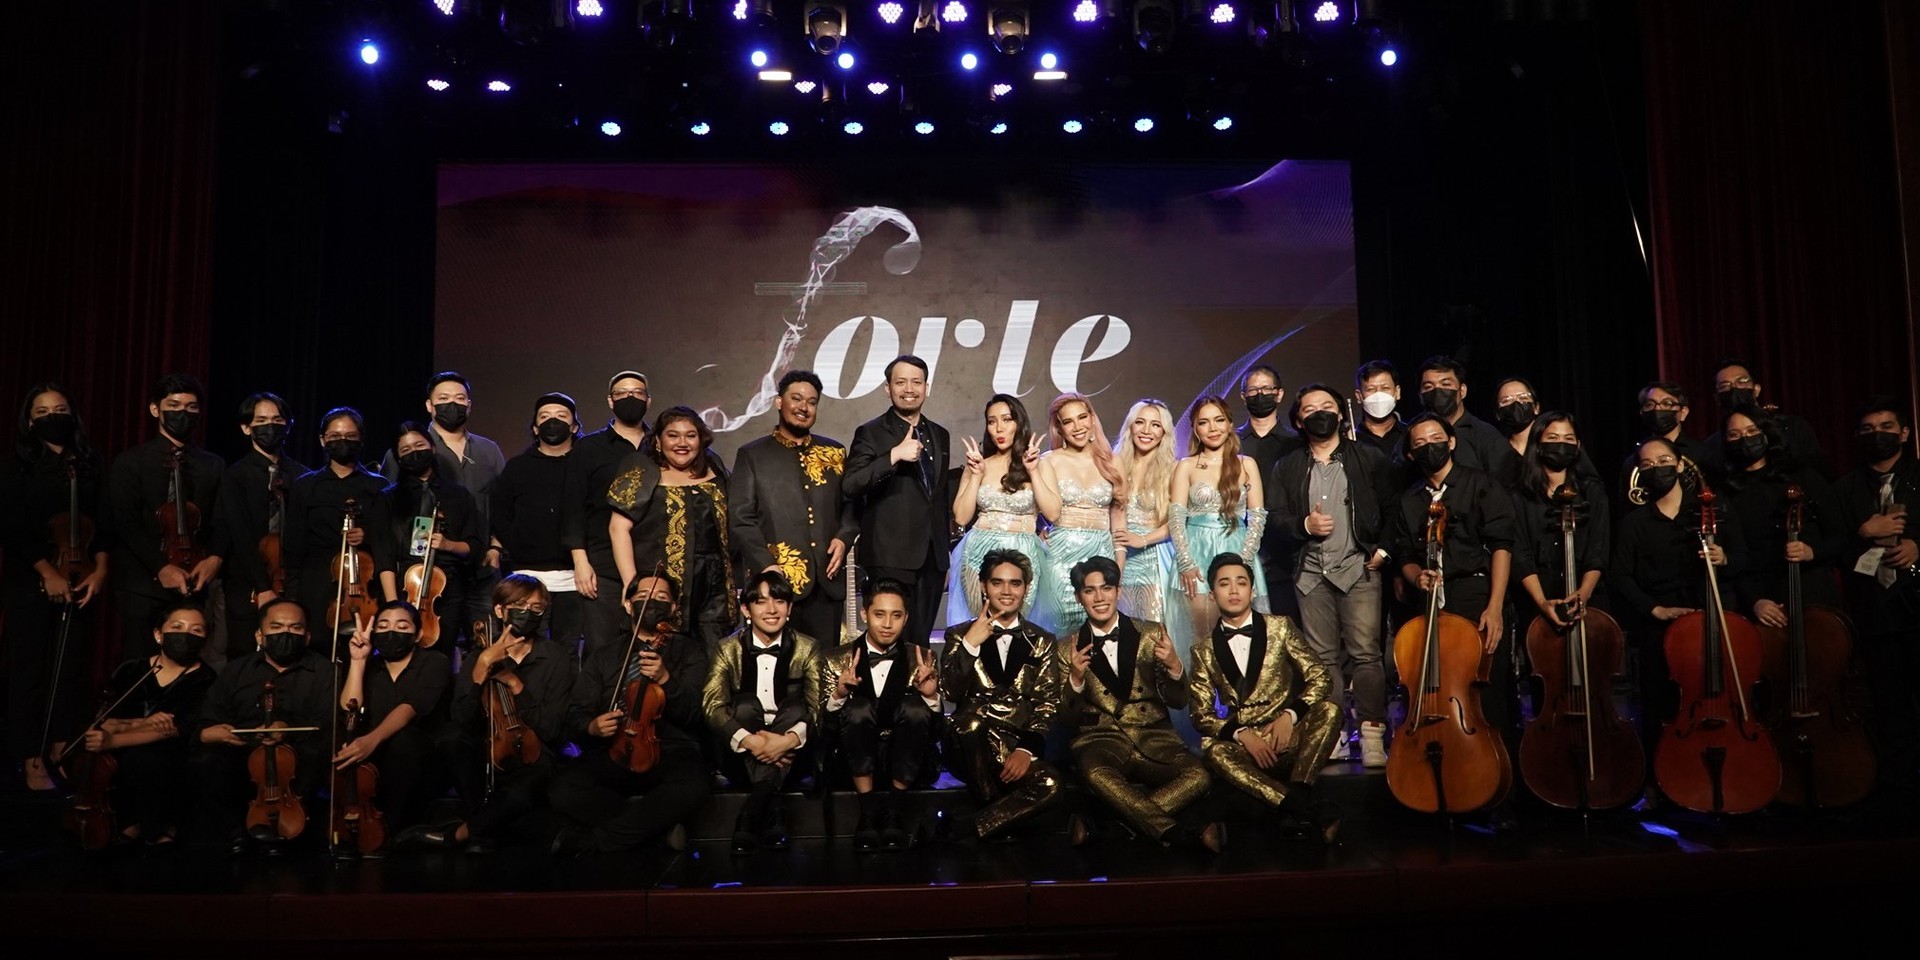 SB19 and 4th Impact stun fans with reimagined hits at Forte: A Benefit Pop Orchestra Concert – gig review